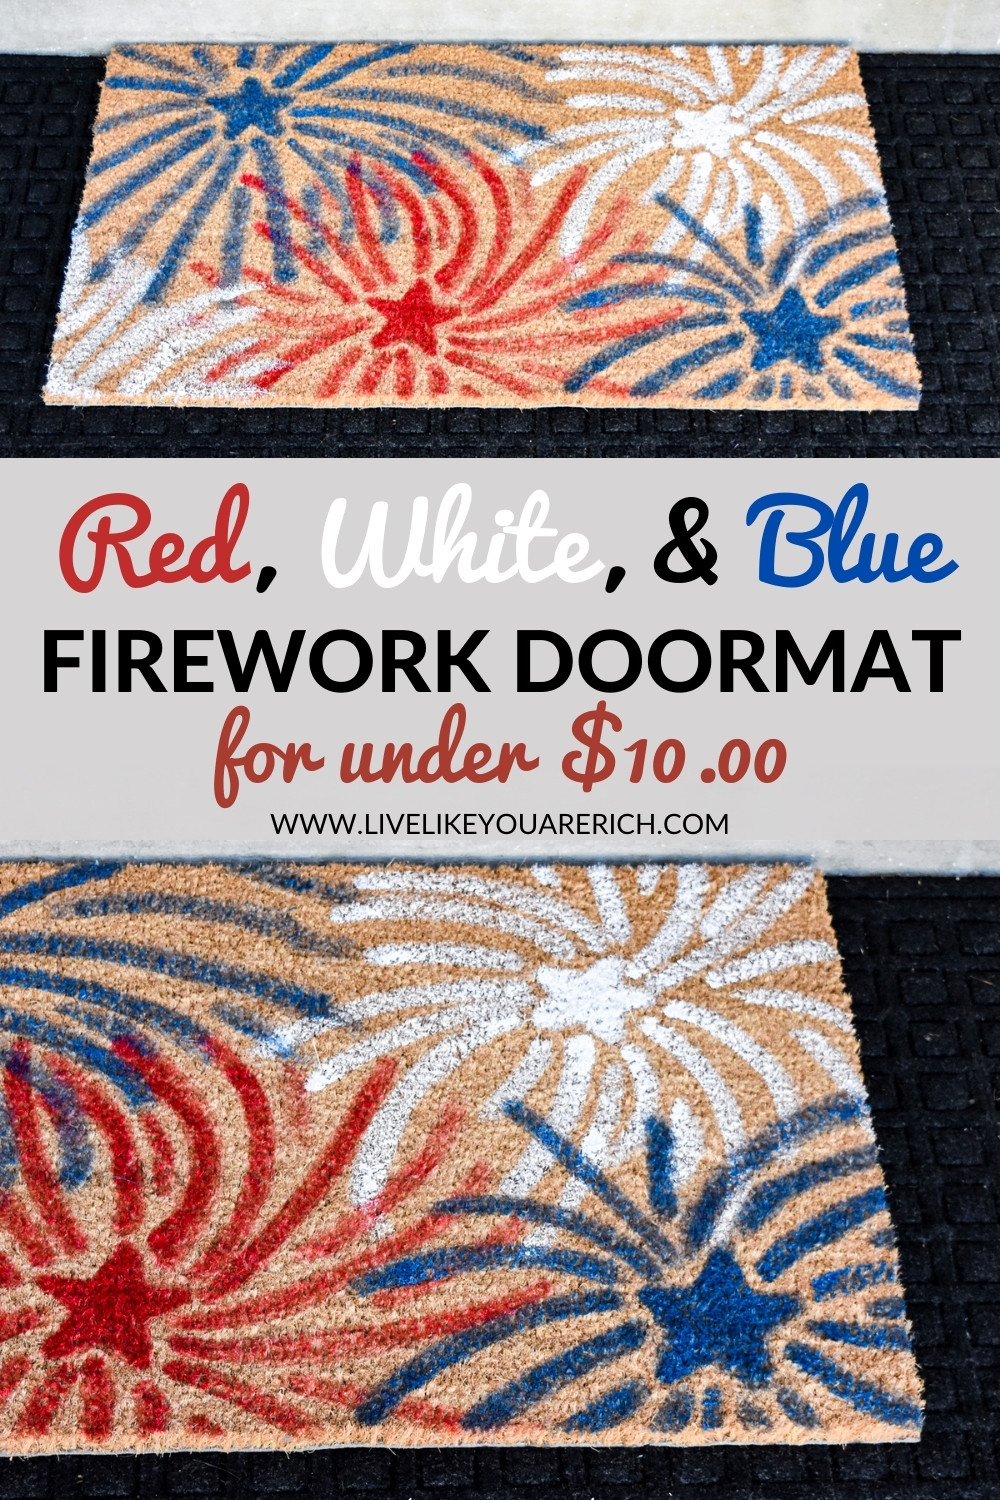 Red, White, and Blue Firework Doormat for Under $10.00